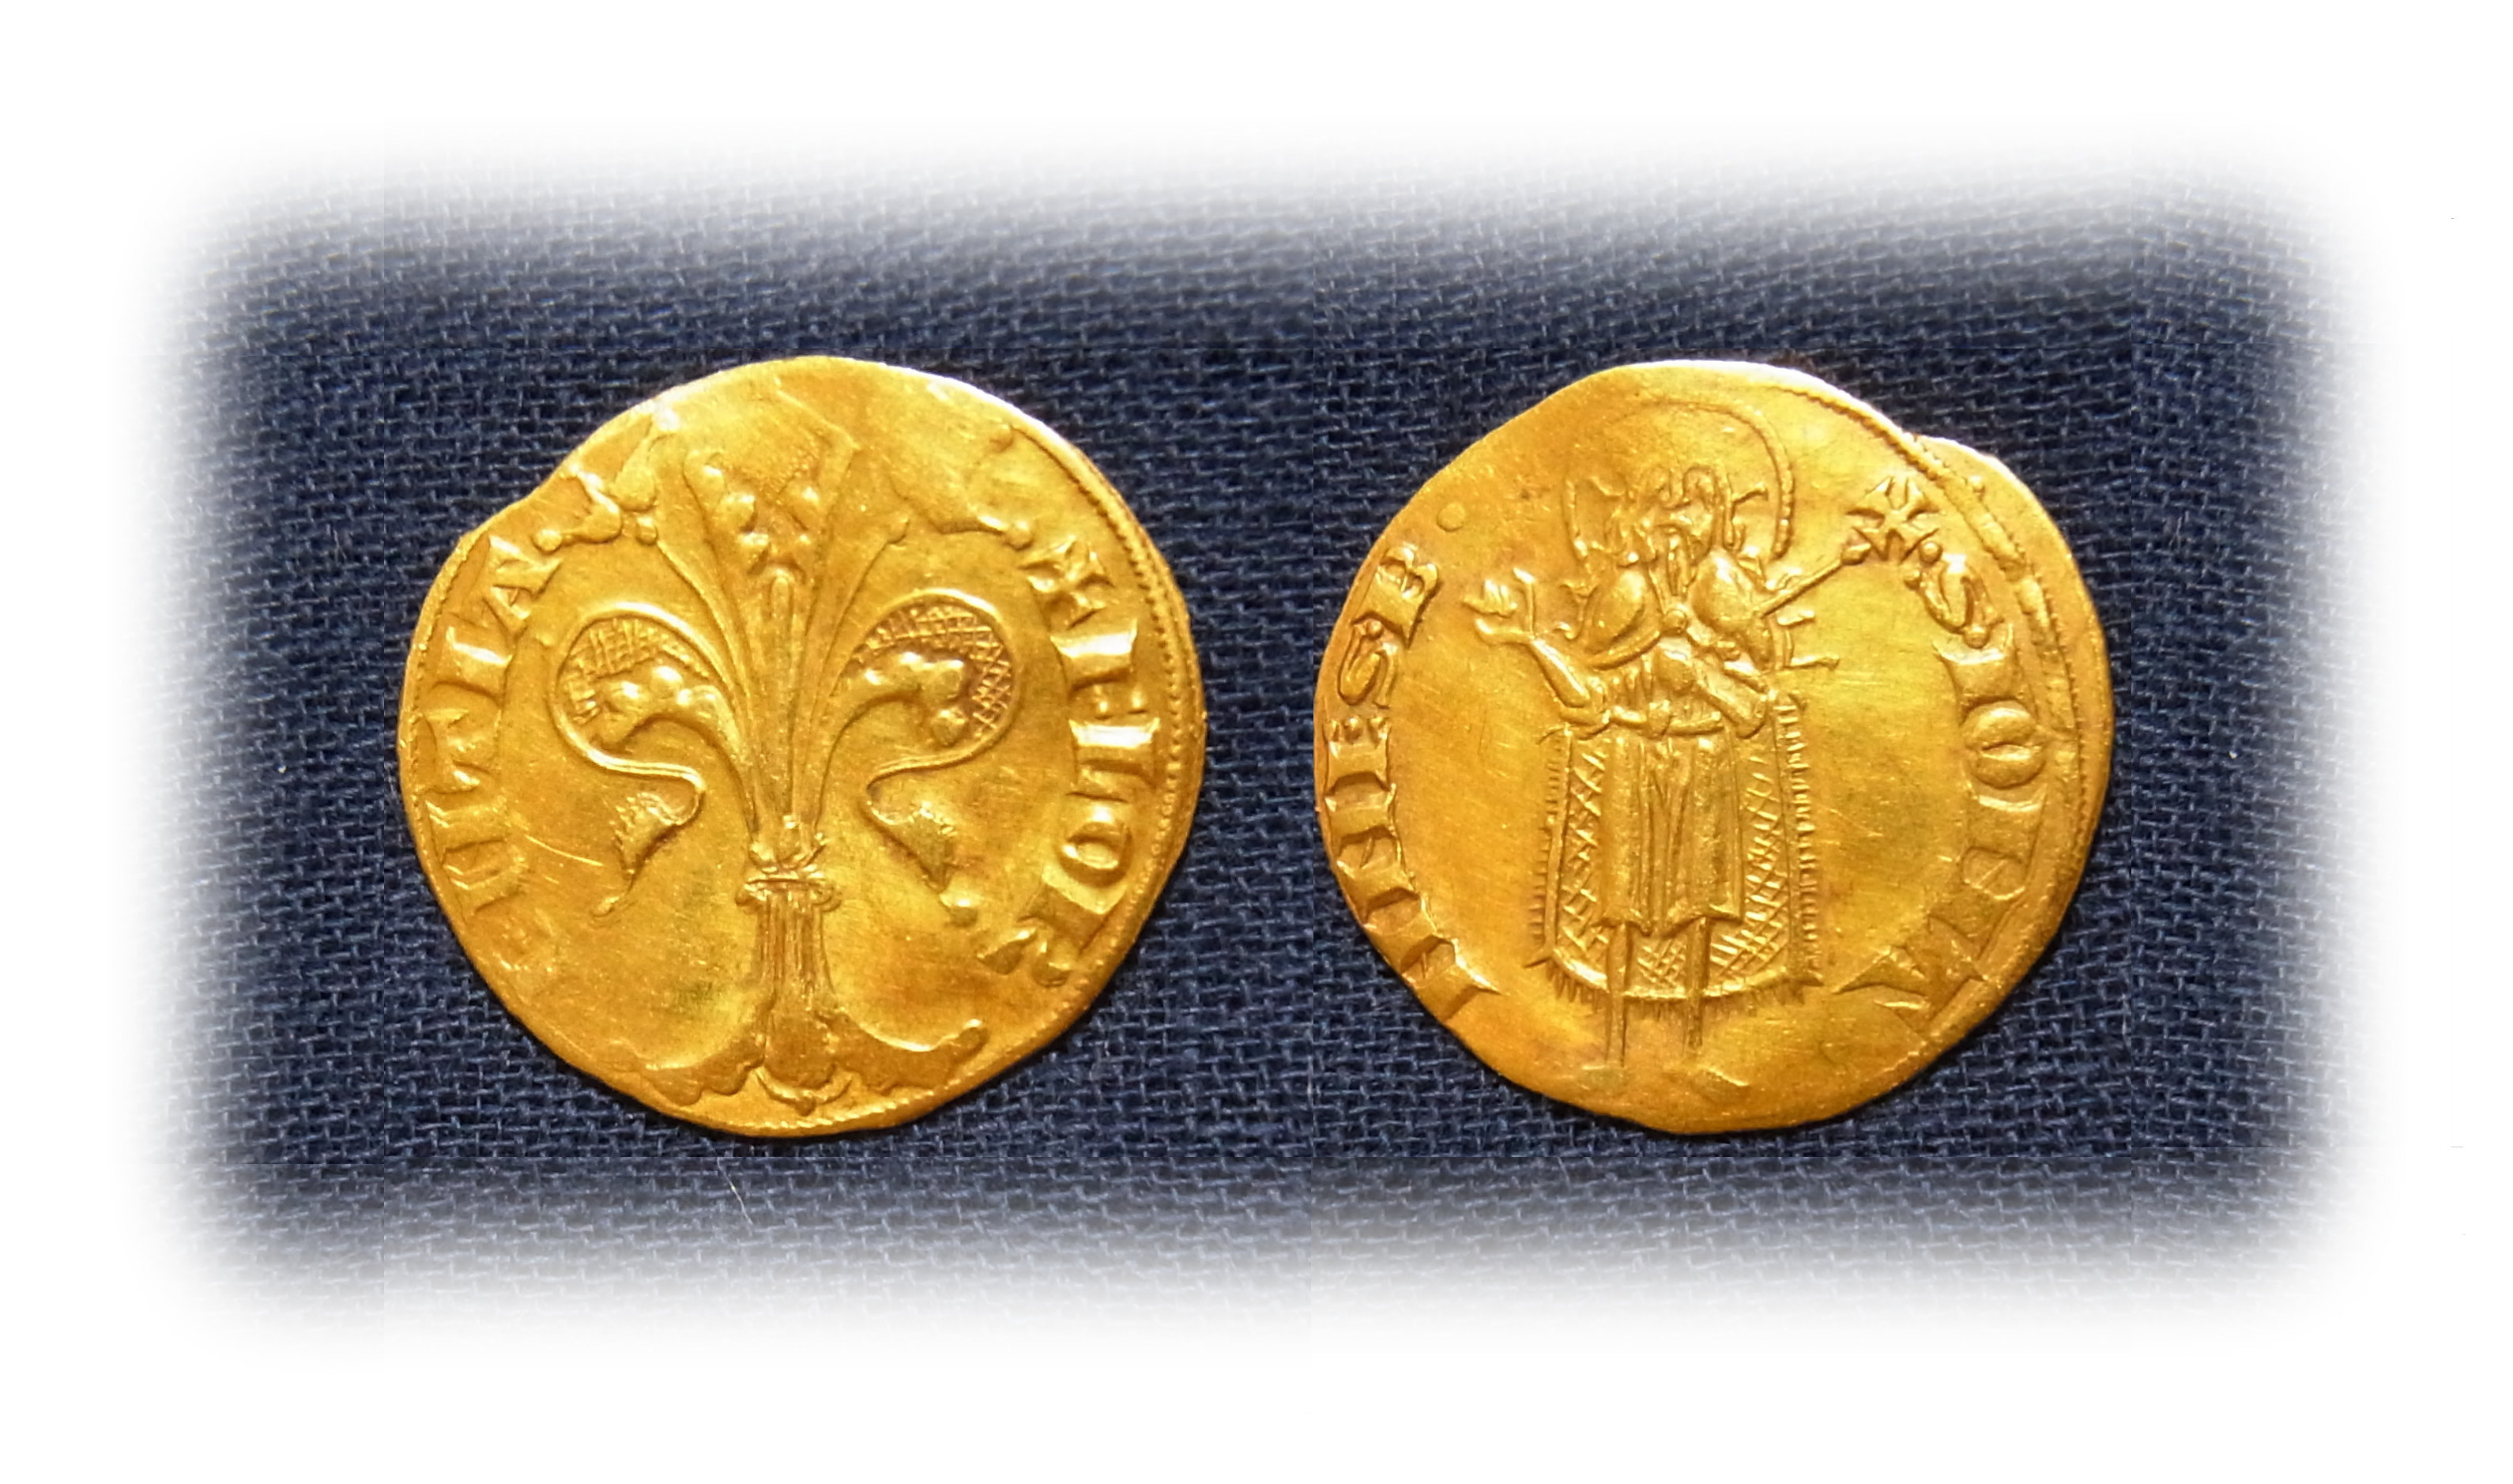 Gold coin, Republic of Florence, Fiorino d'oro, The Florentine florin